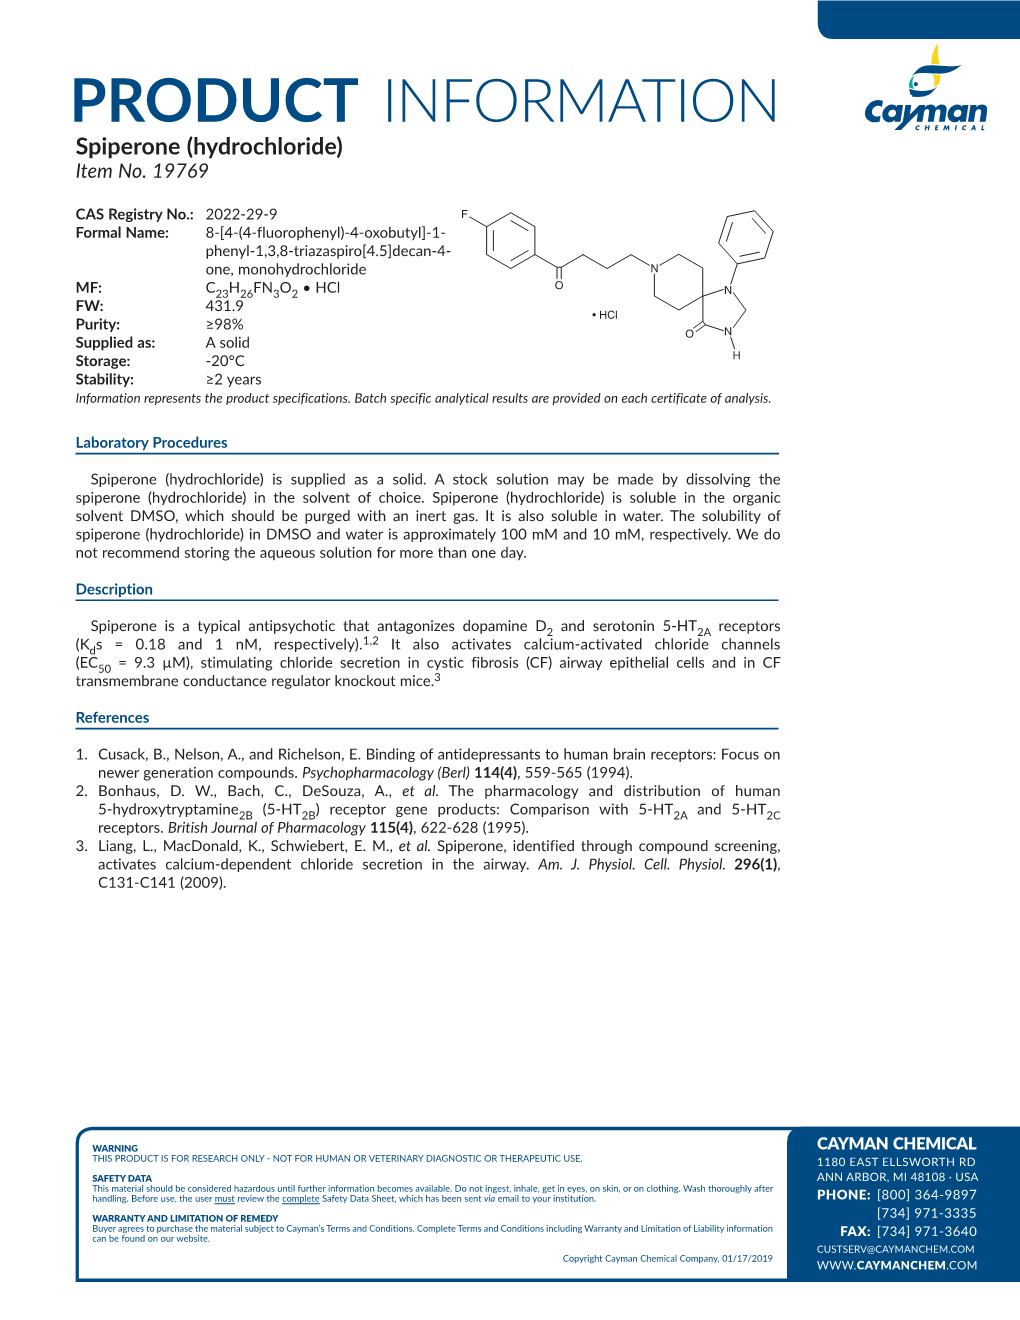 PRODUCT INFORMATION Spiperone (Hydrochloride) Item No